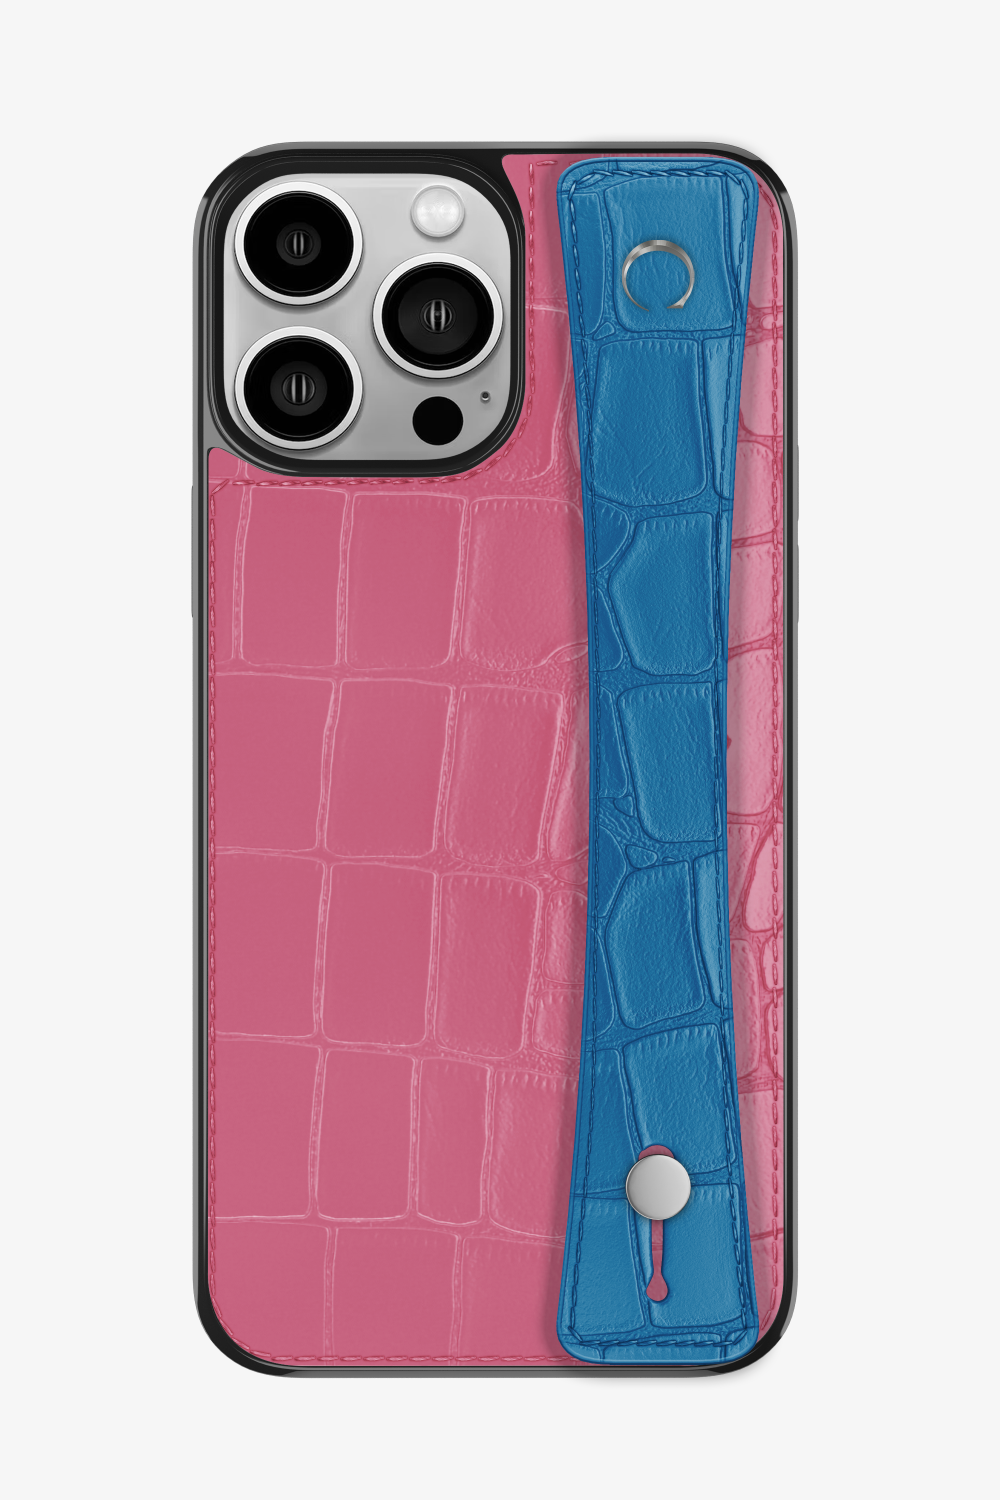 Alligator Sports Strap Case for iPhone 14 Pro Max - Pink / Blue Lagoon - zollofrance